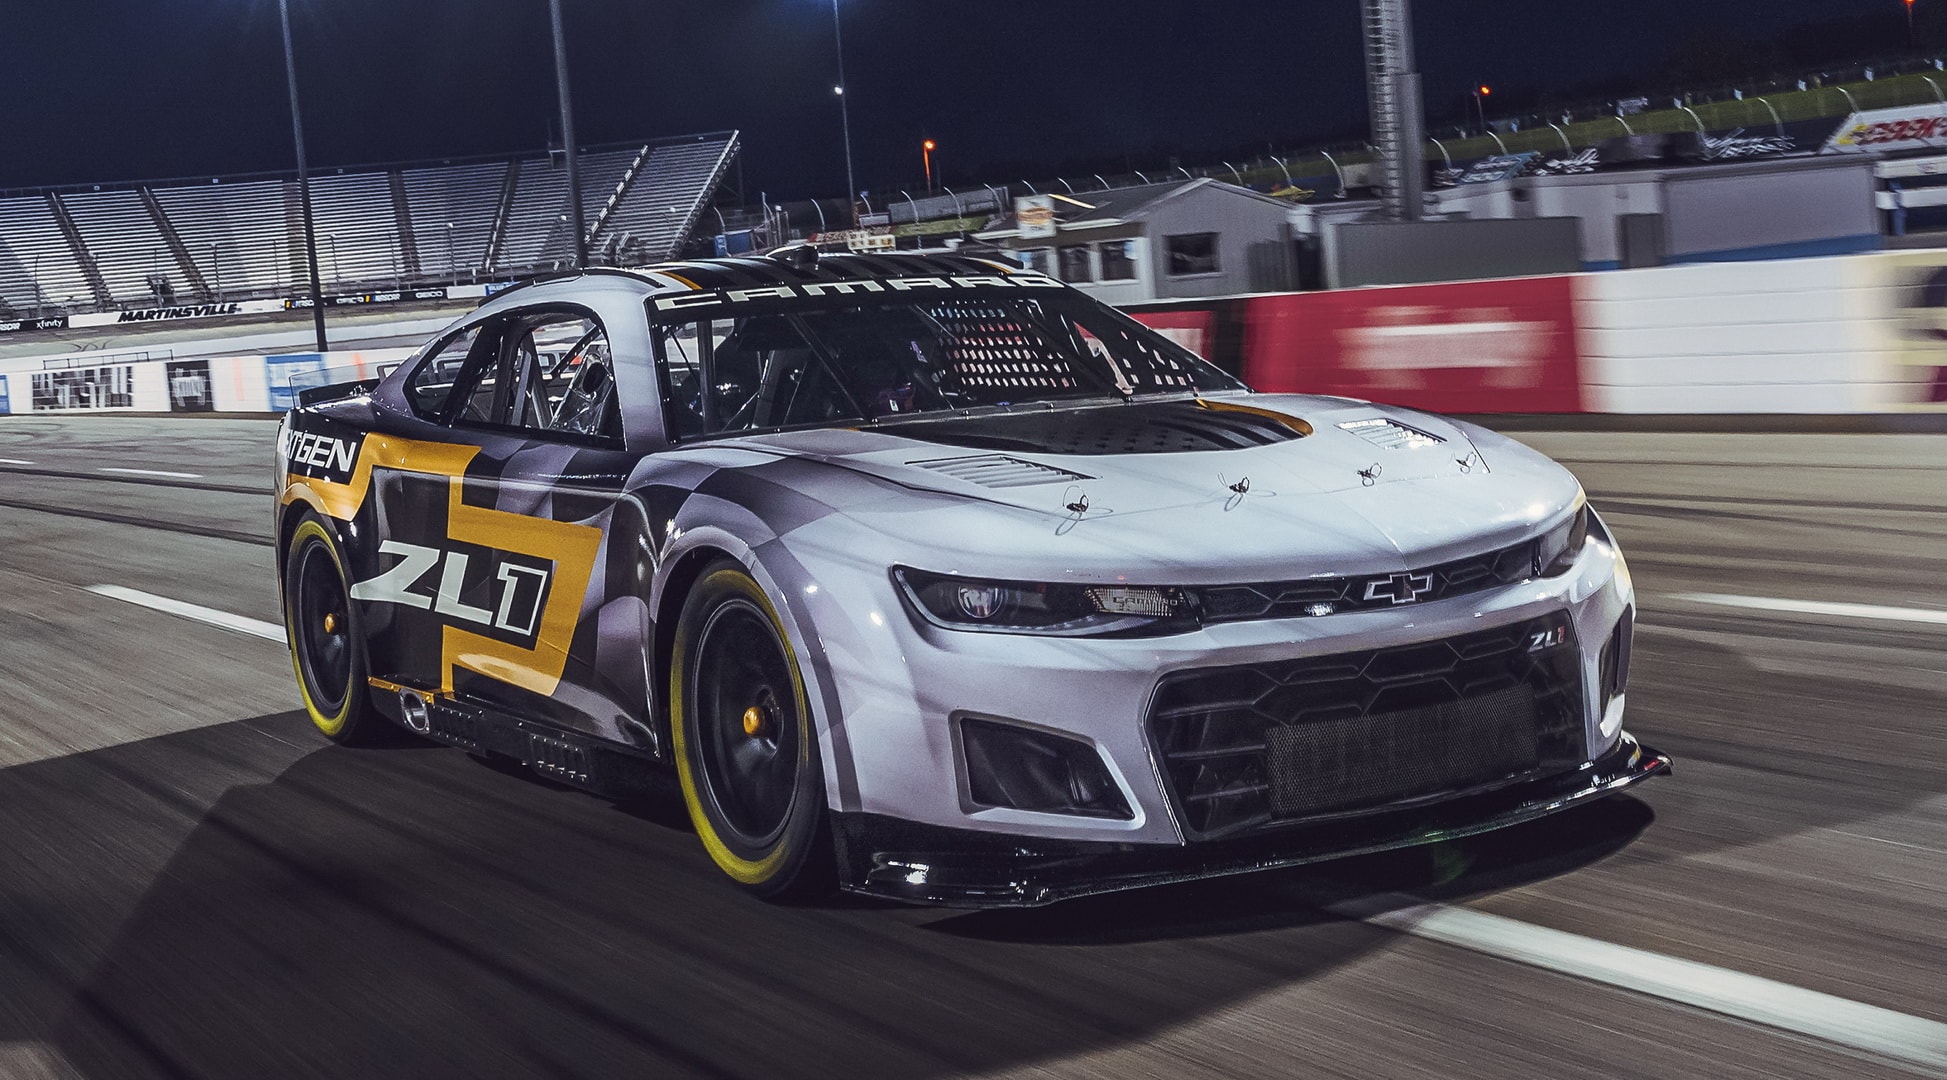 Next Gen Chevrolet Camaro NASCAR Racer Ready to Fight Off Ford and